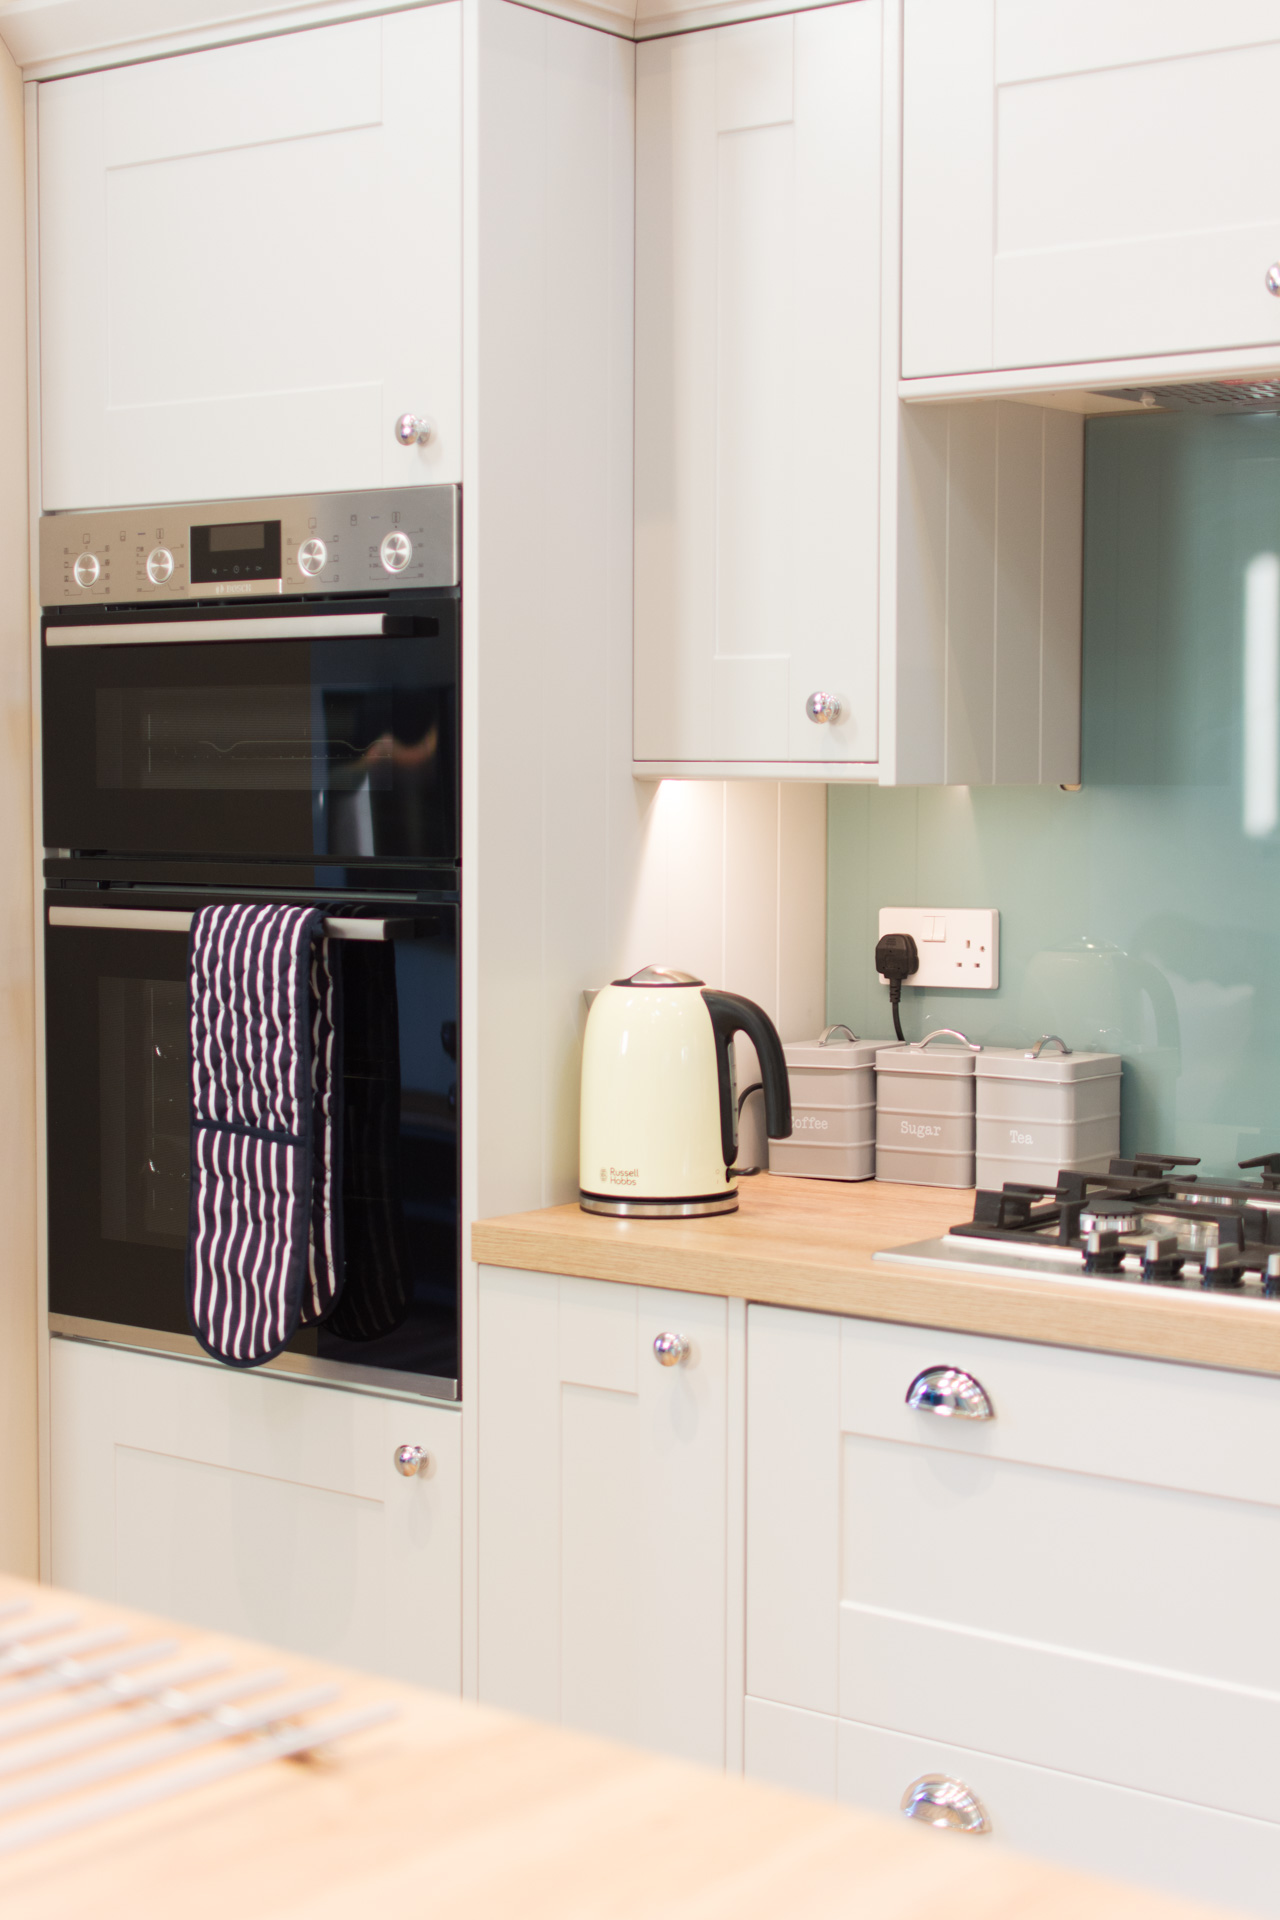 Close up of the kitchen worktop showing amenities including the kettle and toaster.